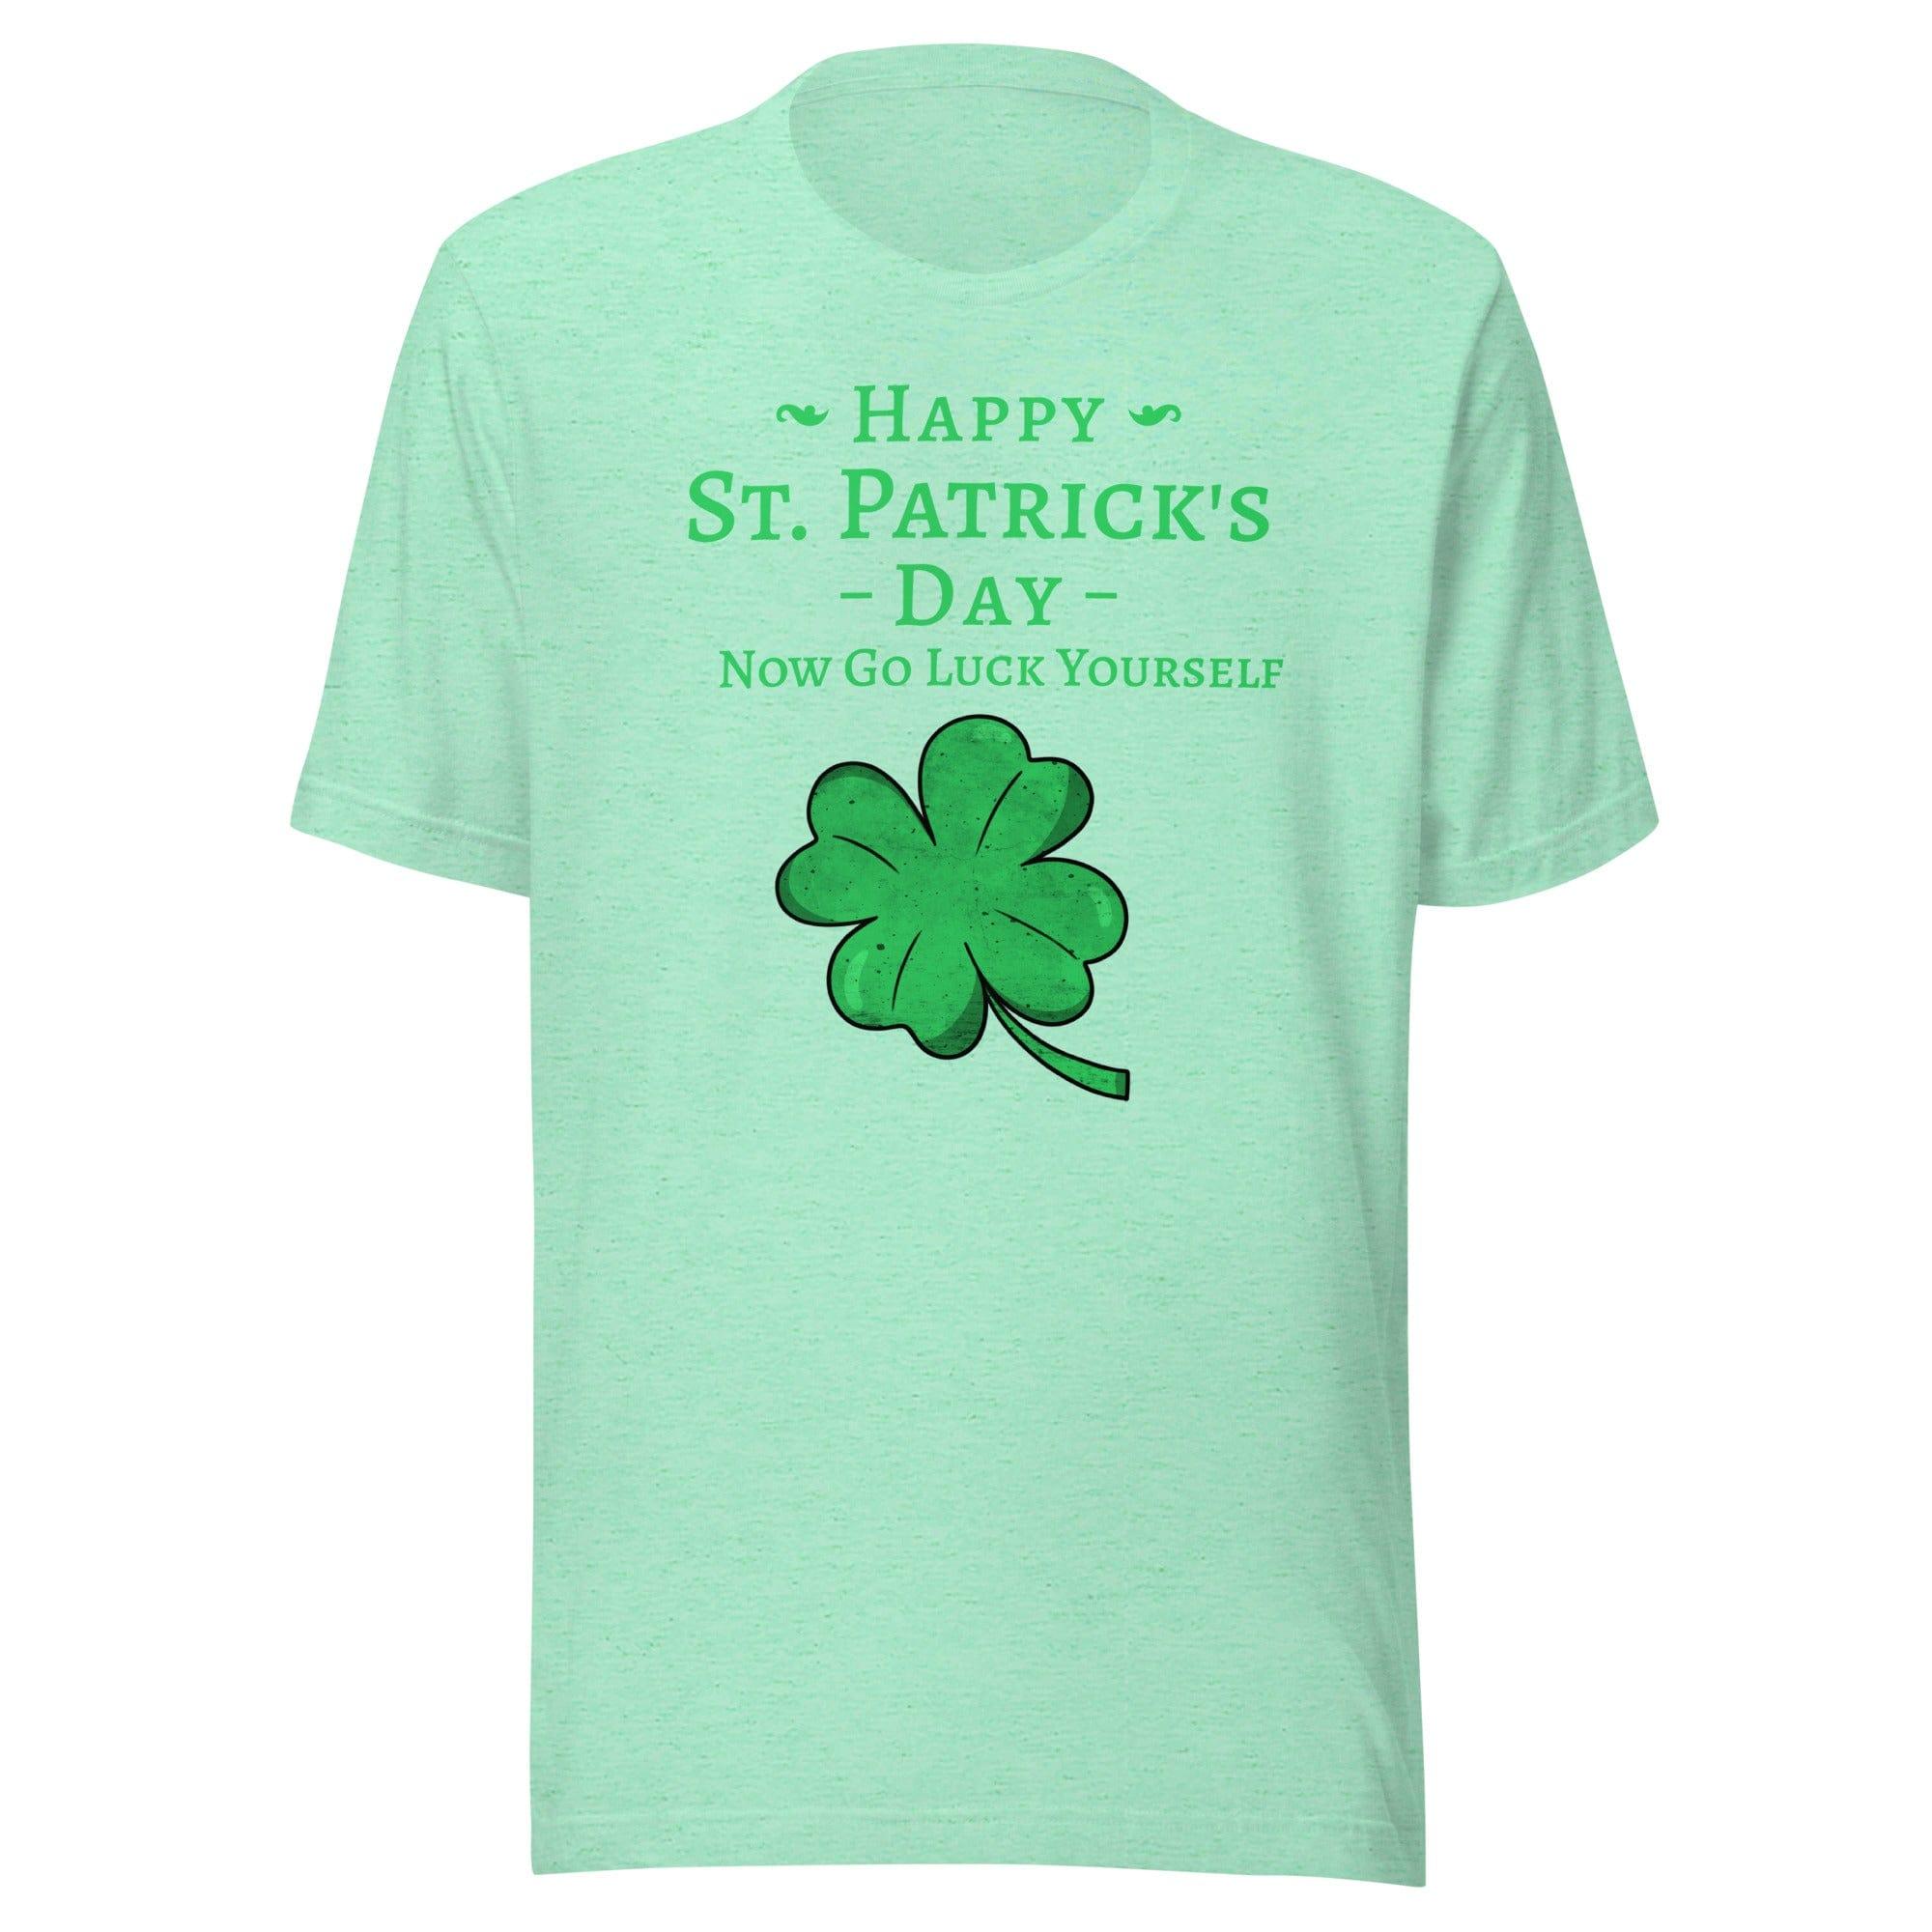 Happy St. Patrick's Day T-shirt Now Go Luck Yourself with Four Leaf Clover Short Sleeve Unisex Top - TopKoalaTee